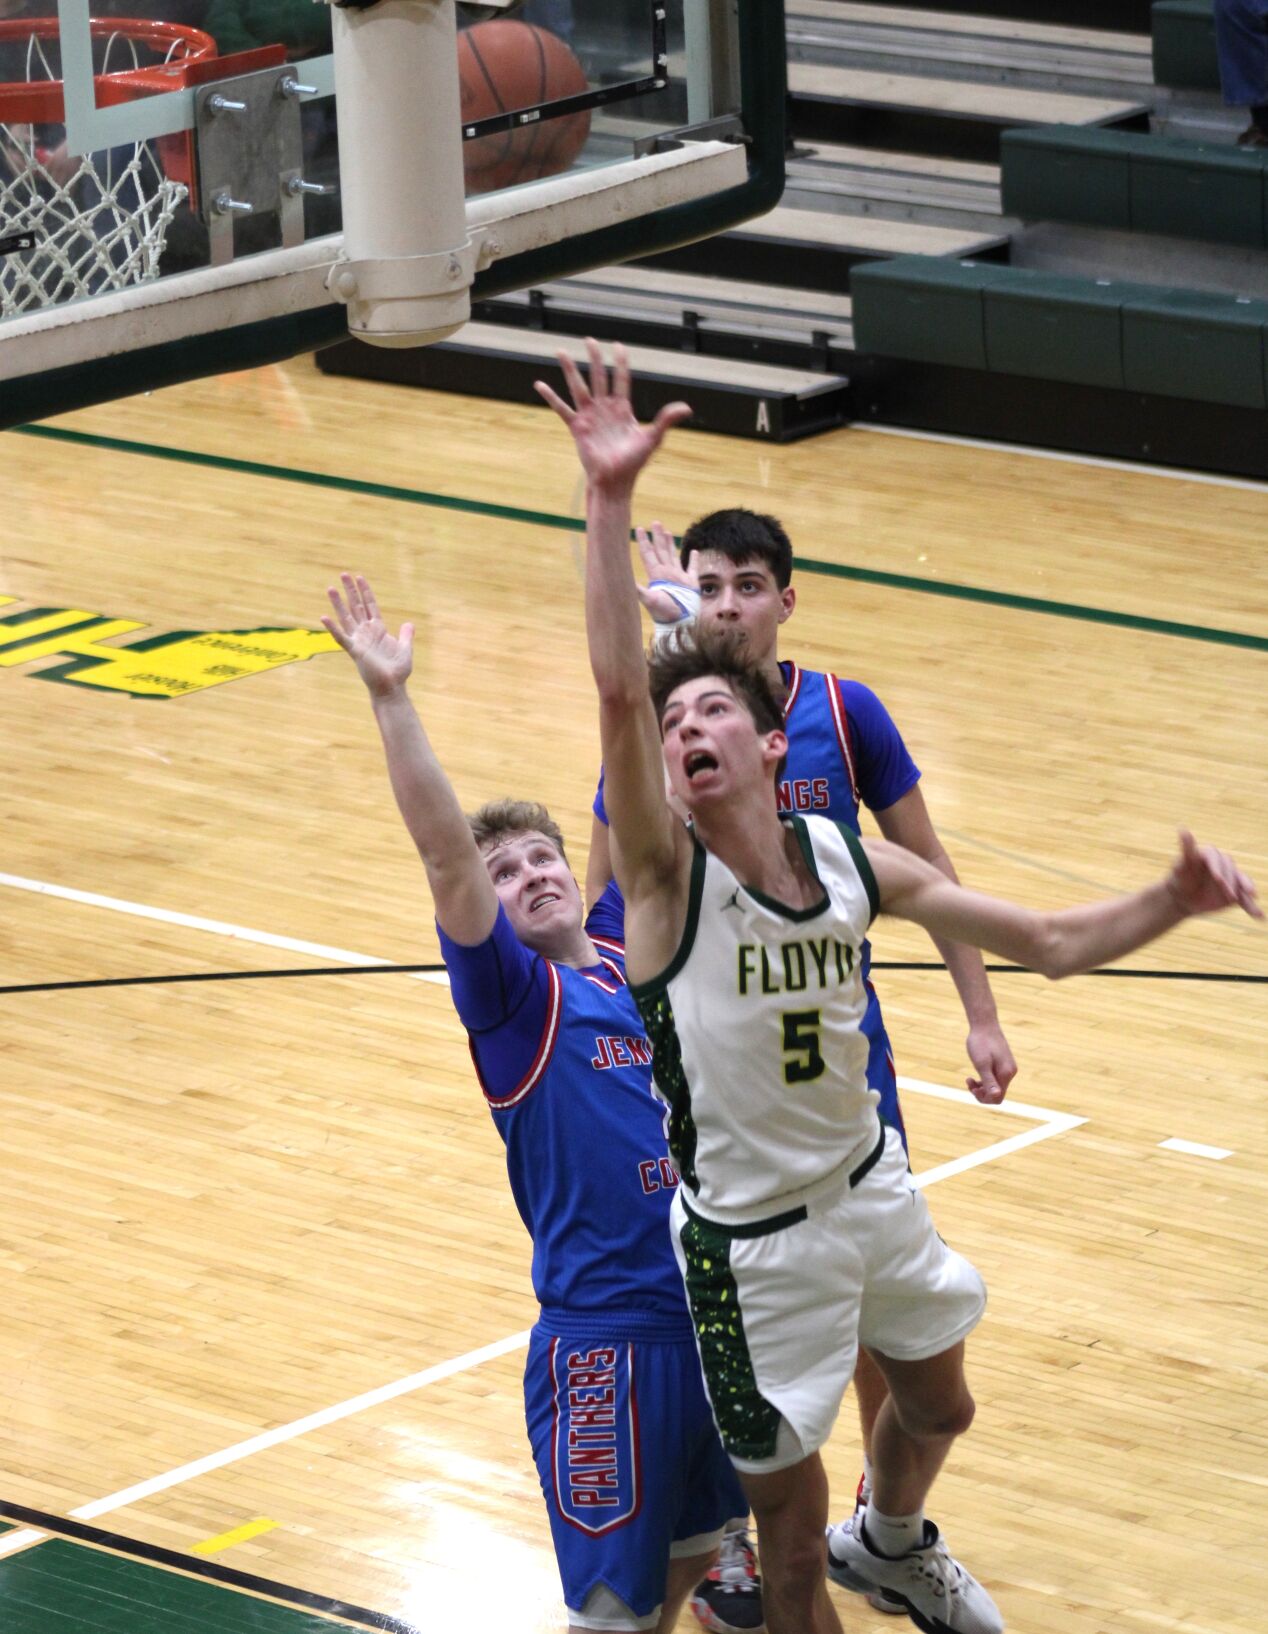 Floyd Central Highlanders Score Season-High 92 Points in Victory Over Jennings County